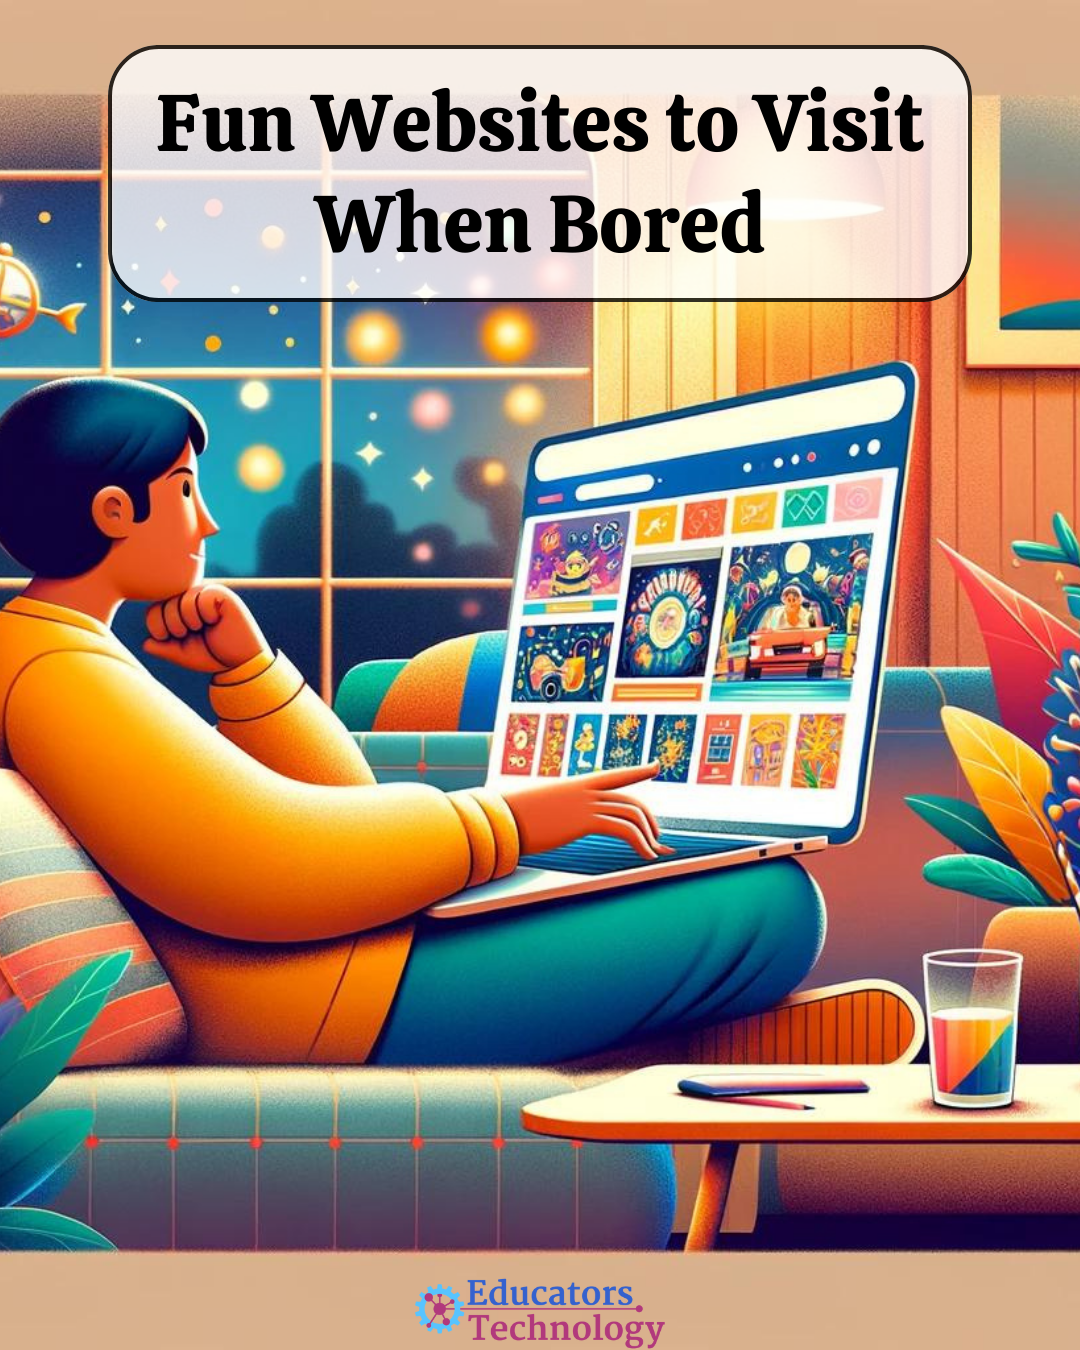 fun websites to visit when bored at school